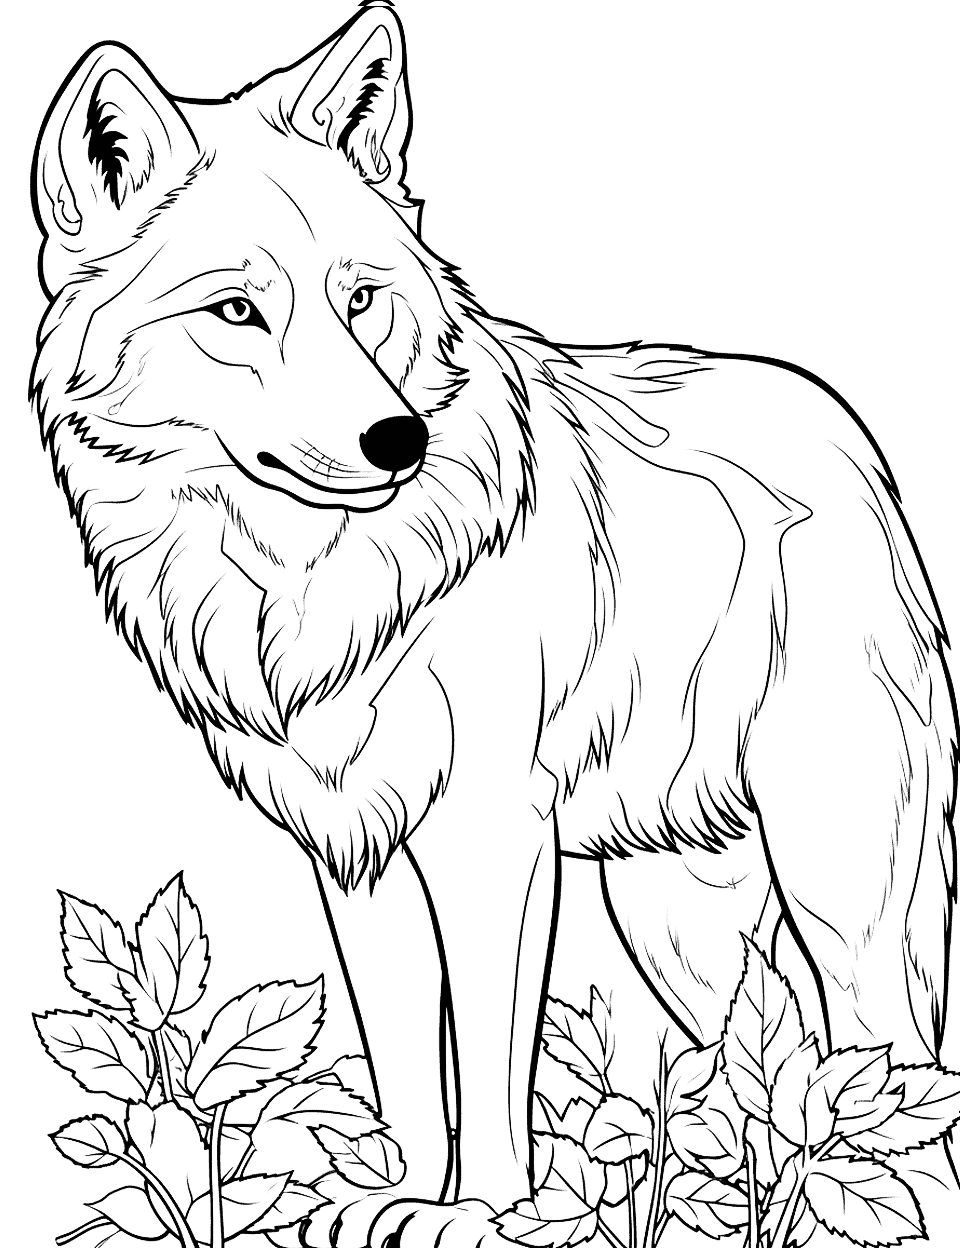 Autumn Wolf Coloring Page - A wolf with fur blending in with fall foliage.